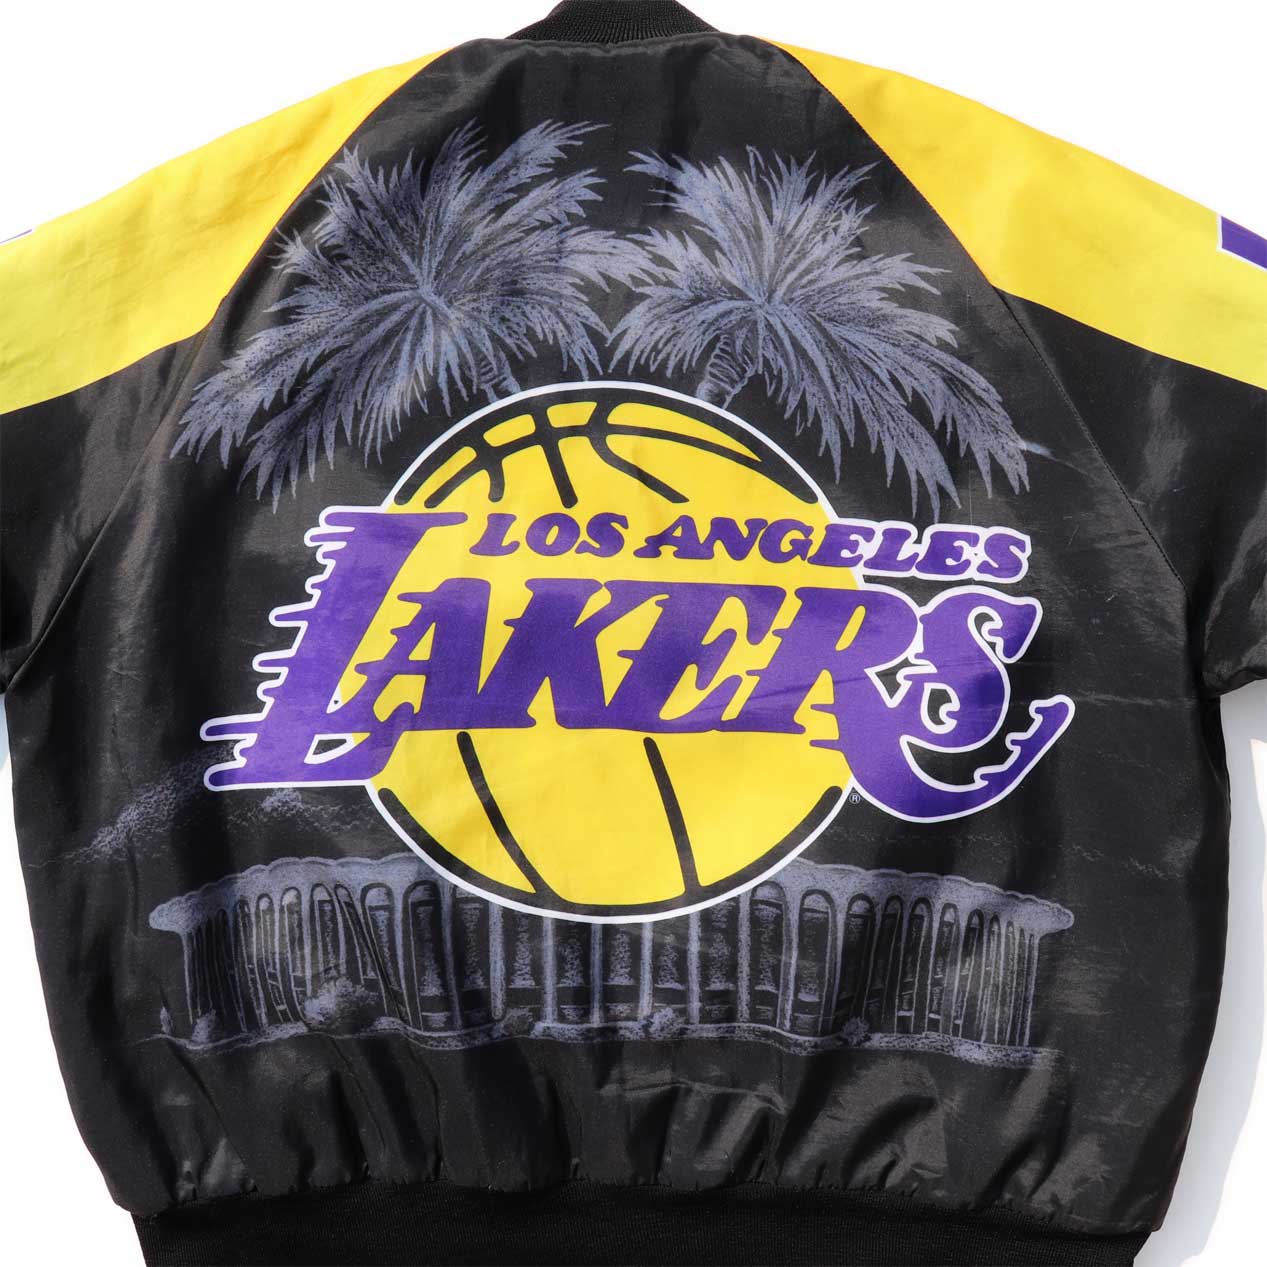 POST JUNK / 90's CHALK LINE ”LOS ANGELES LAKERS” USA製 スタジャン [XL]